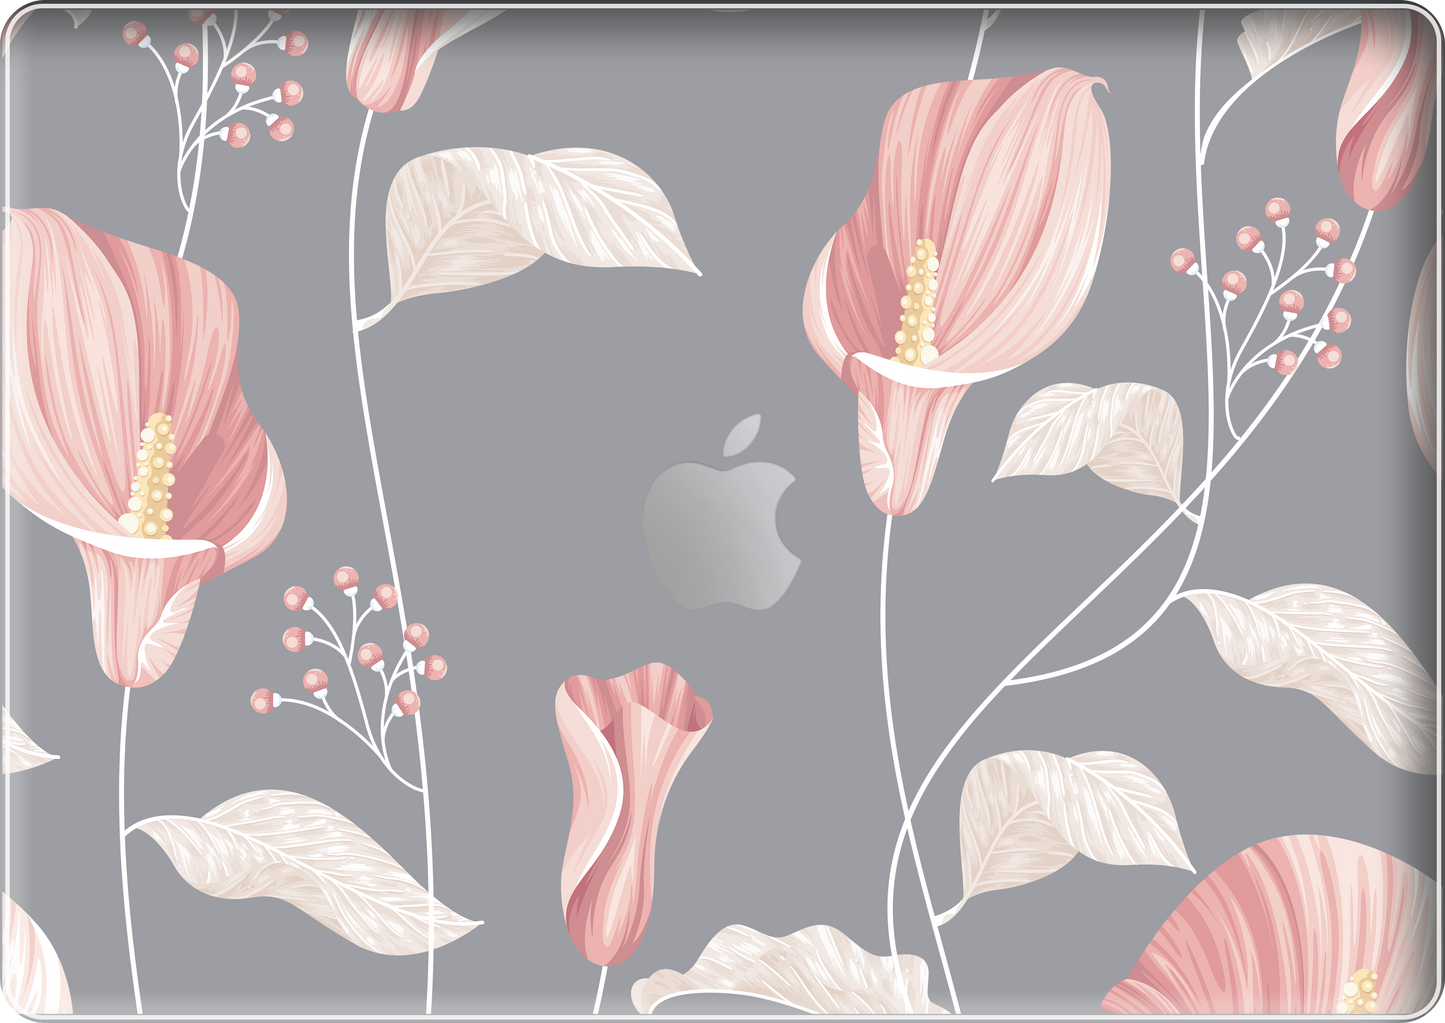 MacBook Snap Case - Easter Lily